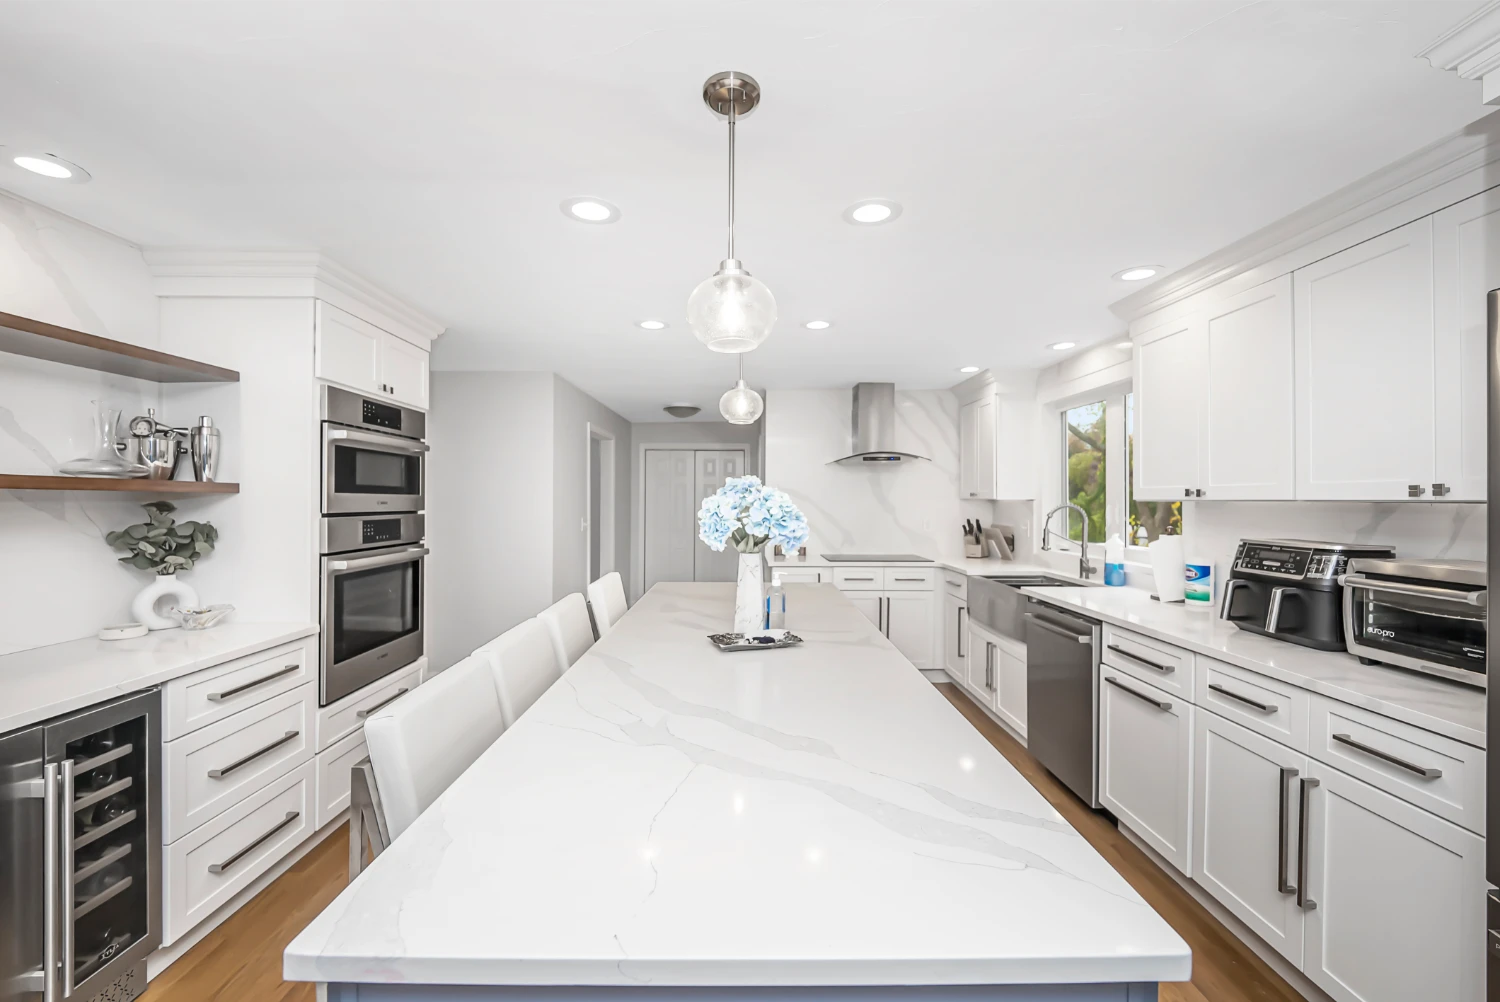 White kitchen countertop and cabinet in modern style